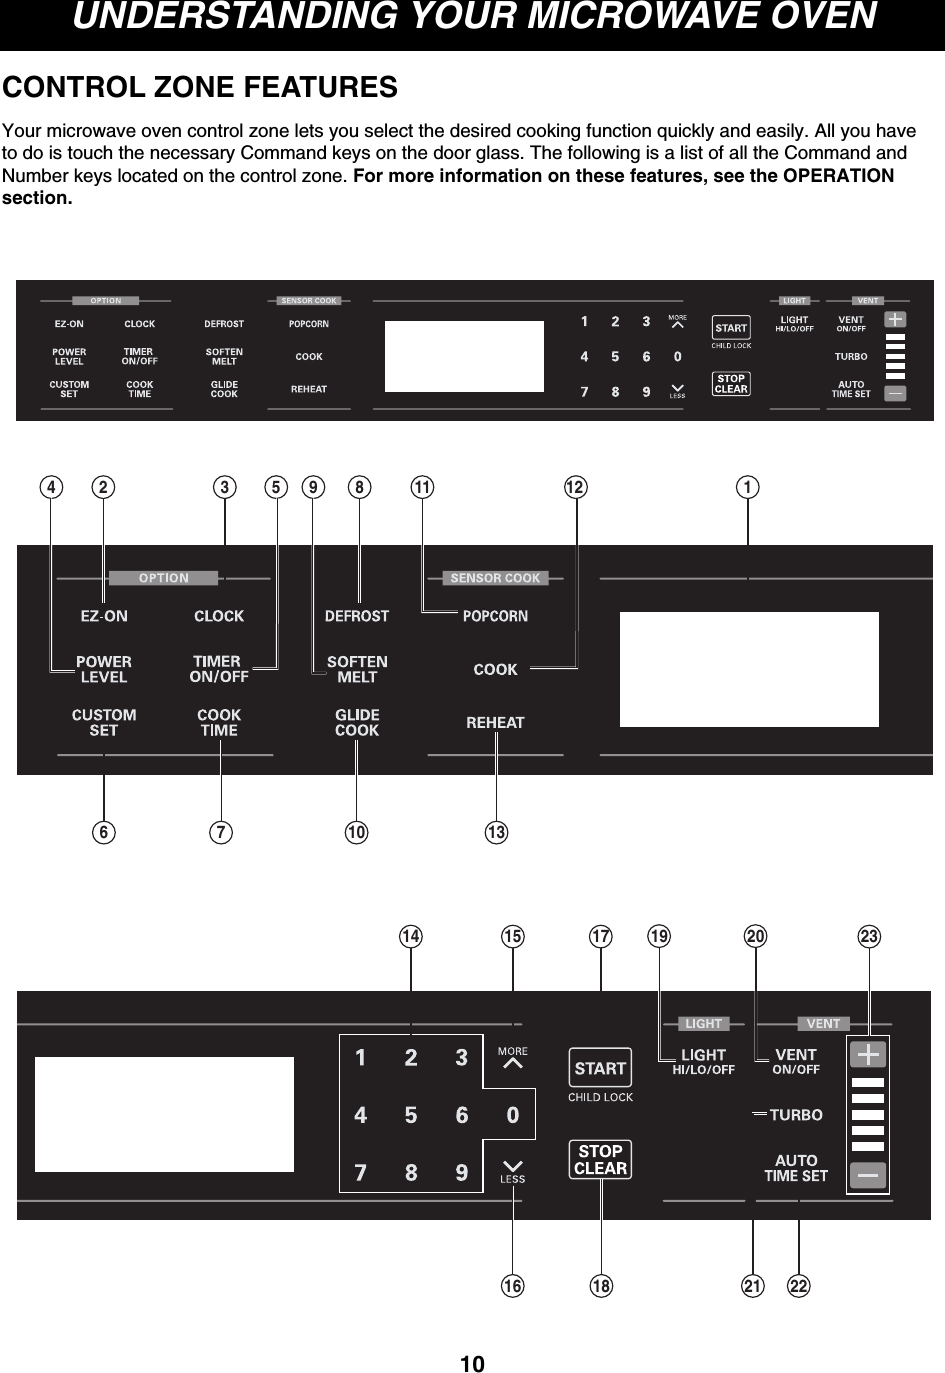 UNDERSTANDING YOUR MICROWAVE OVENCONTROL ZONE FEATURESYour microwave oven control zone lets you select the desired cooking function quickly and easily. All you haveto do is touch the necessary Command keys on the door glass. The following is a list of all the Command andNumber keys located on the control zone. For more information on these features, see the OPERATIONsection.102314 895 12116 7 10 1314 15 17 2319 2016 18 2221